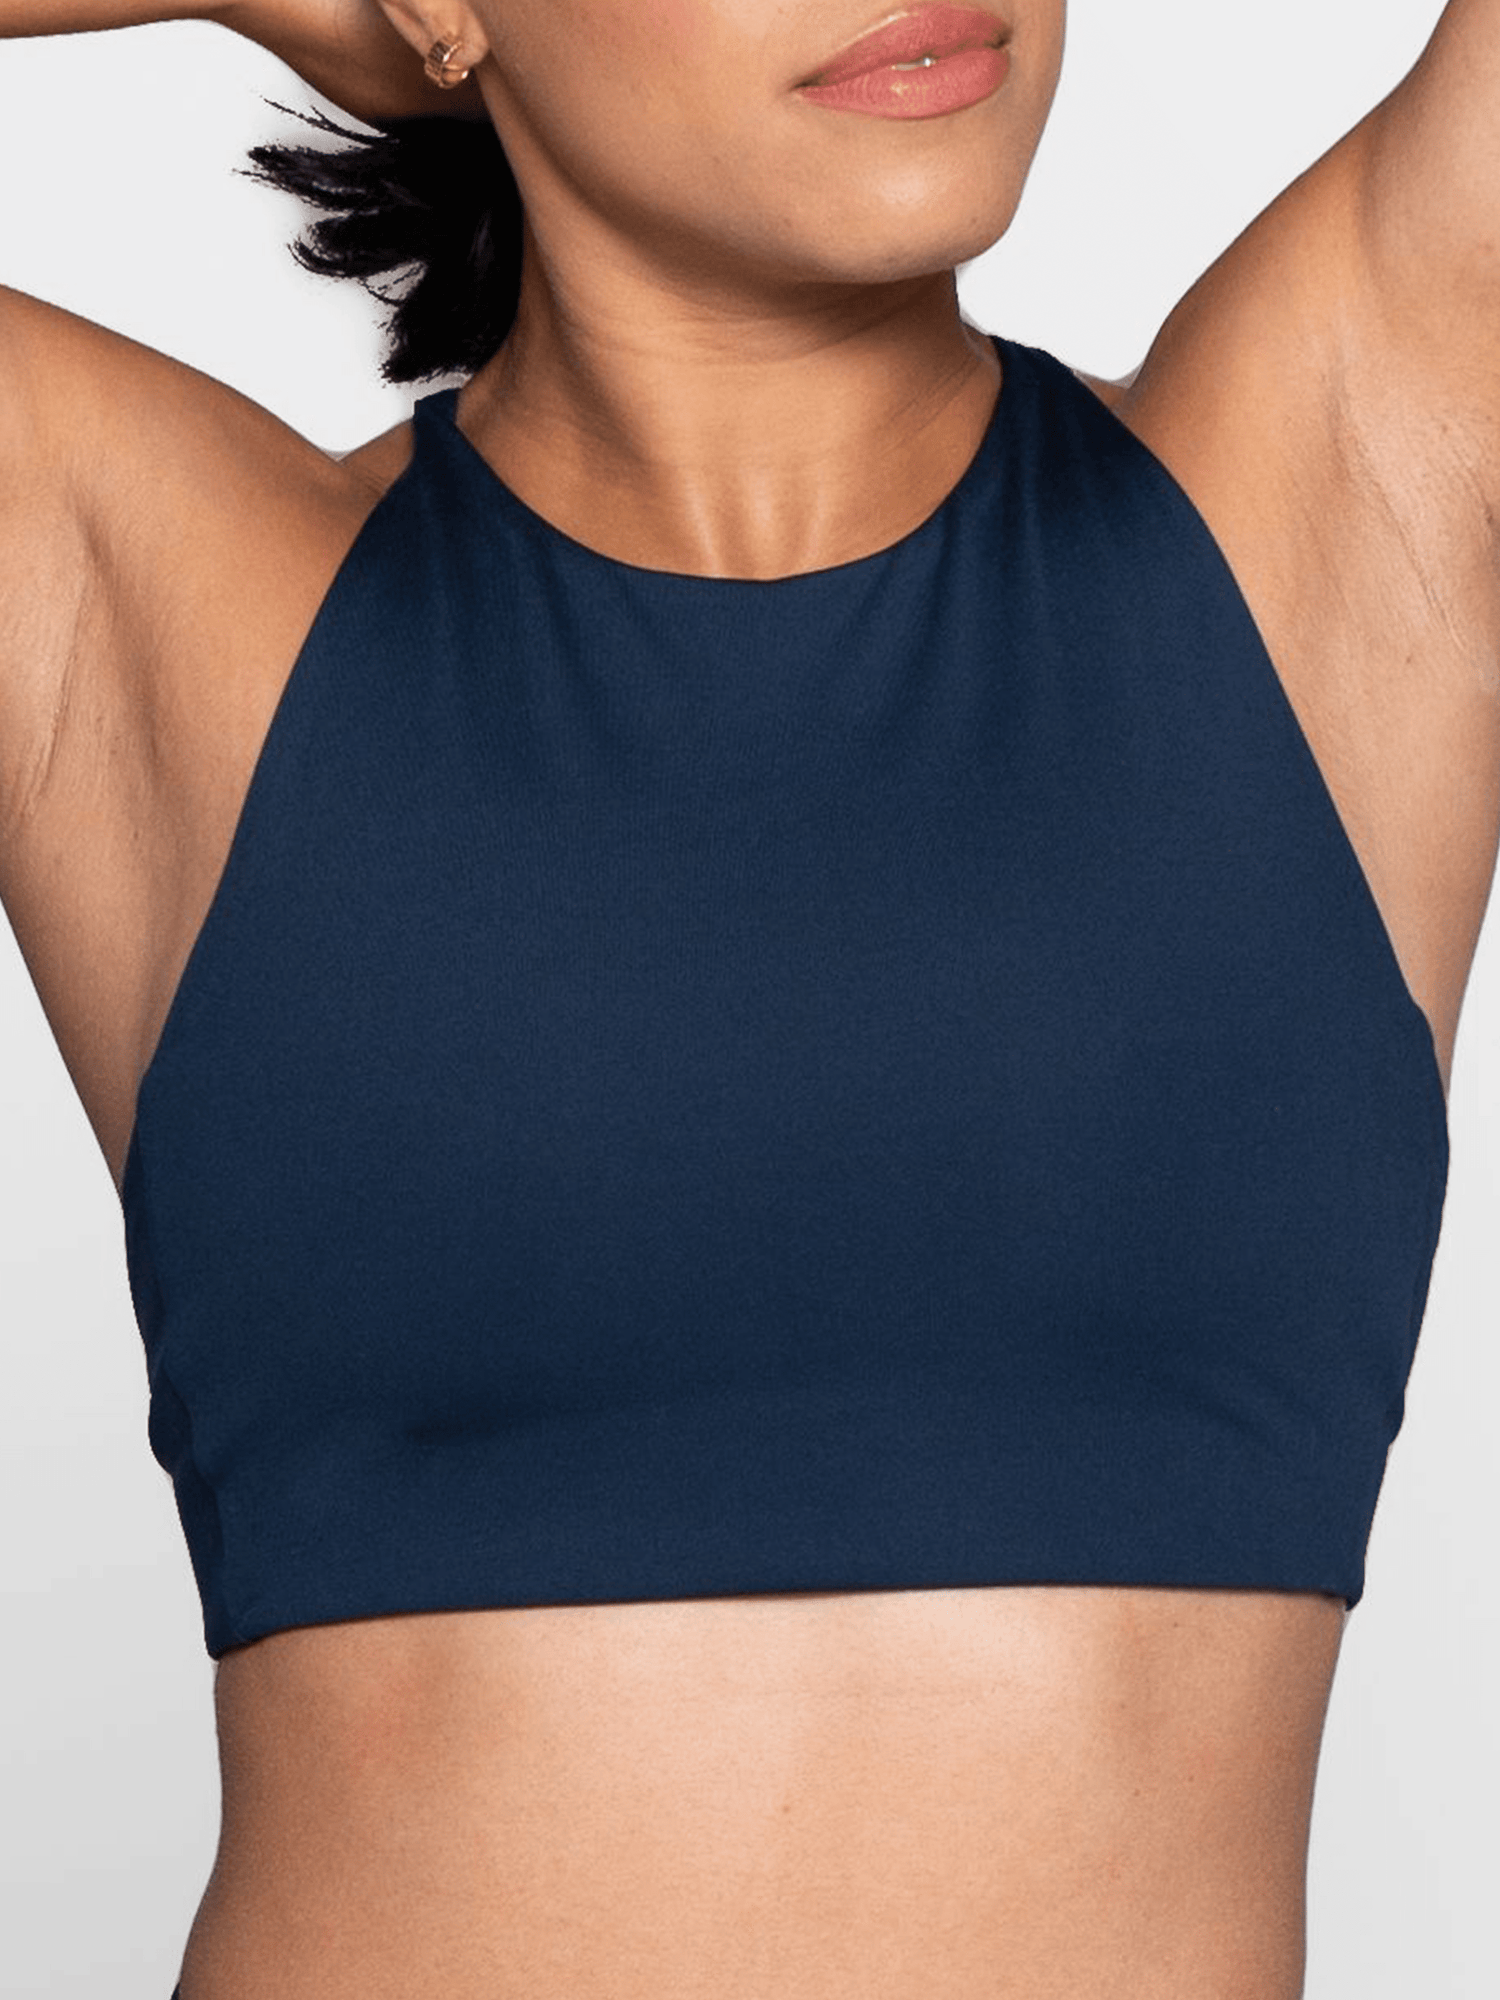 Girlfriend Collective Topanga sports Bra - Made from recycled plastic bottles Midnight Underwear